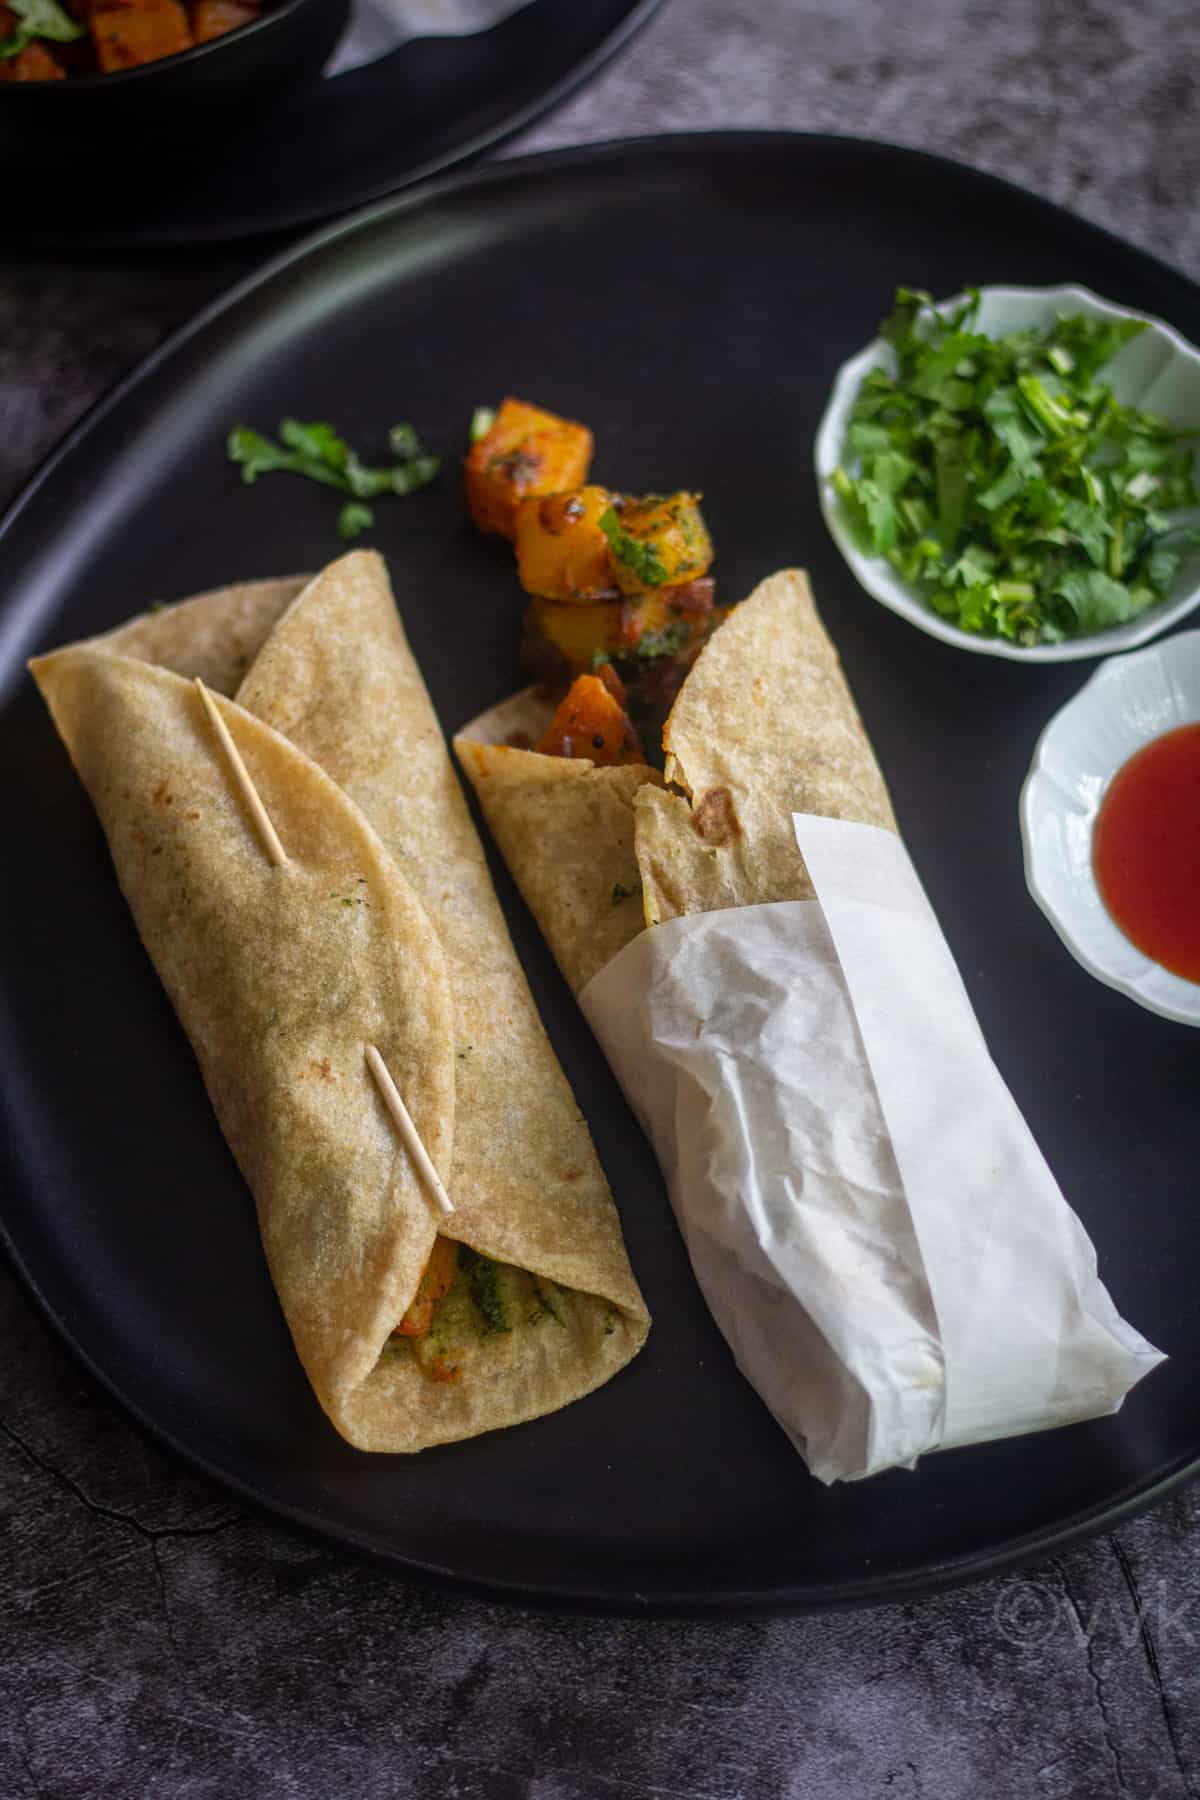 aloo kathi rolls served in black plate. One roll folded in parchment paper